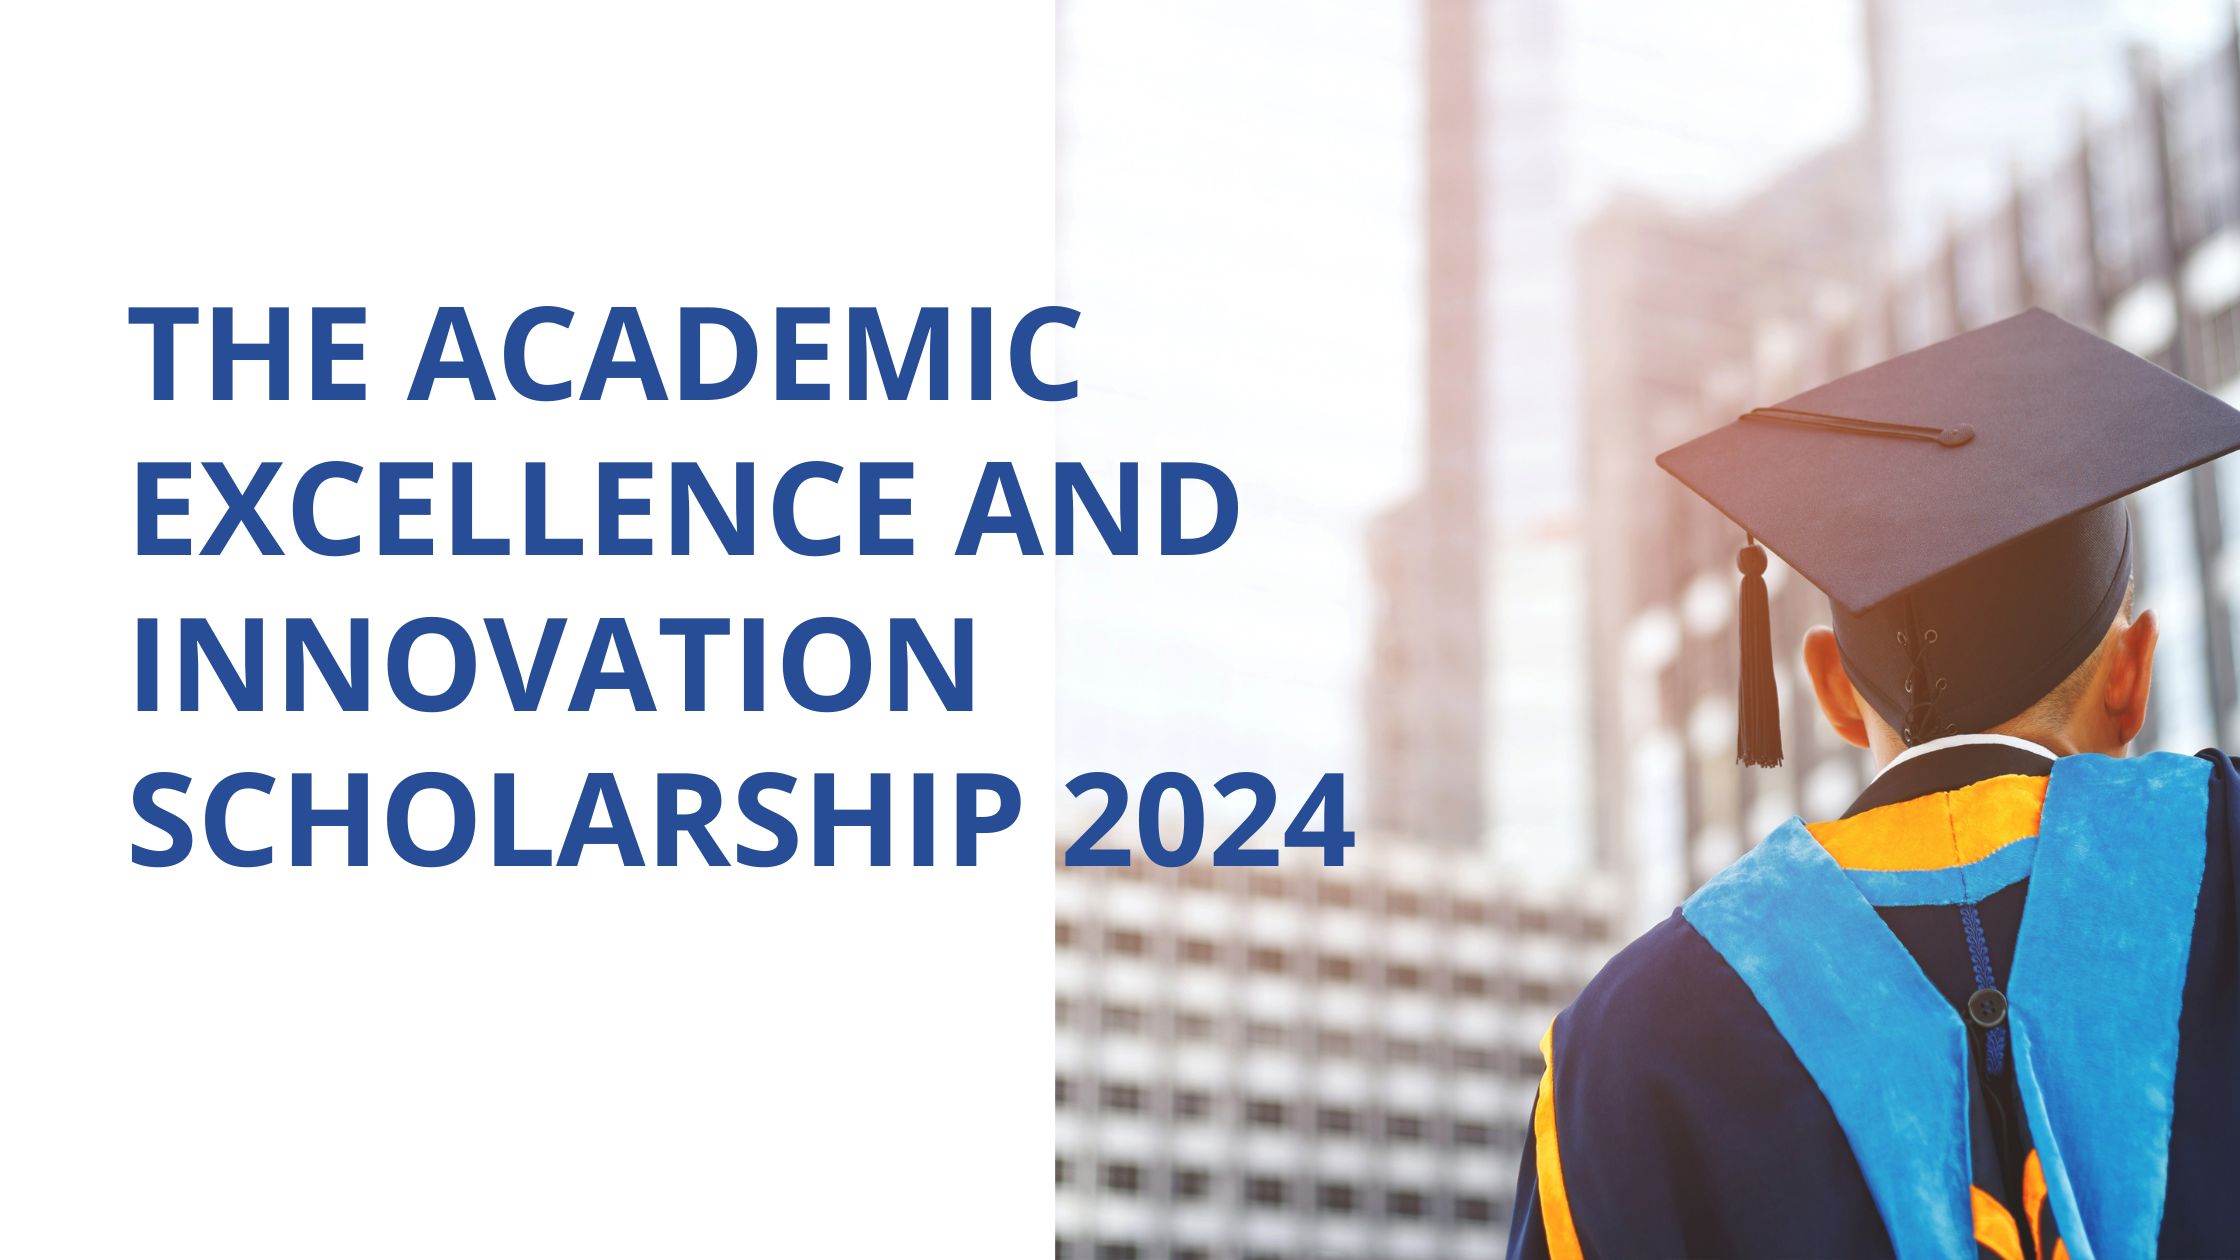 The Academic Excellence and Innovation Scholarship 2024